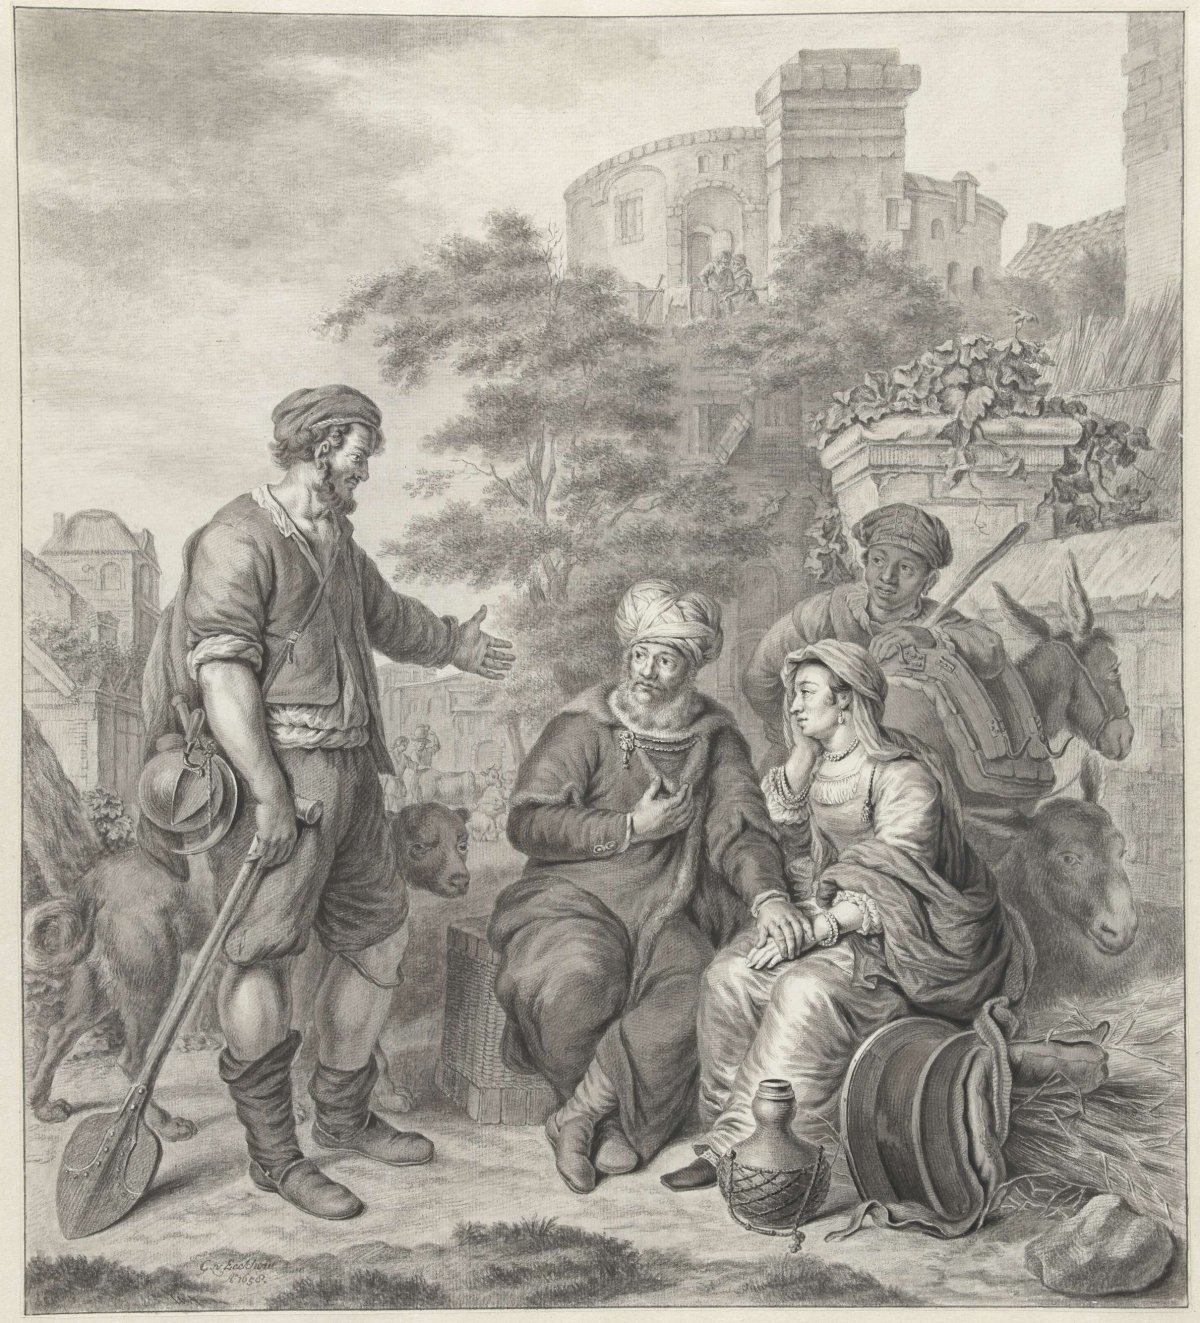 The Levite with his concubine is offered lodging in Gibea, Abraham Delfos, 1779